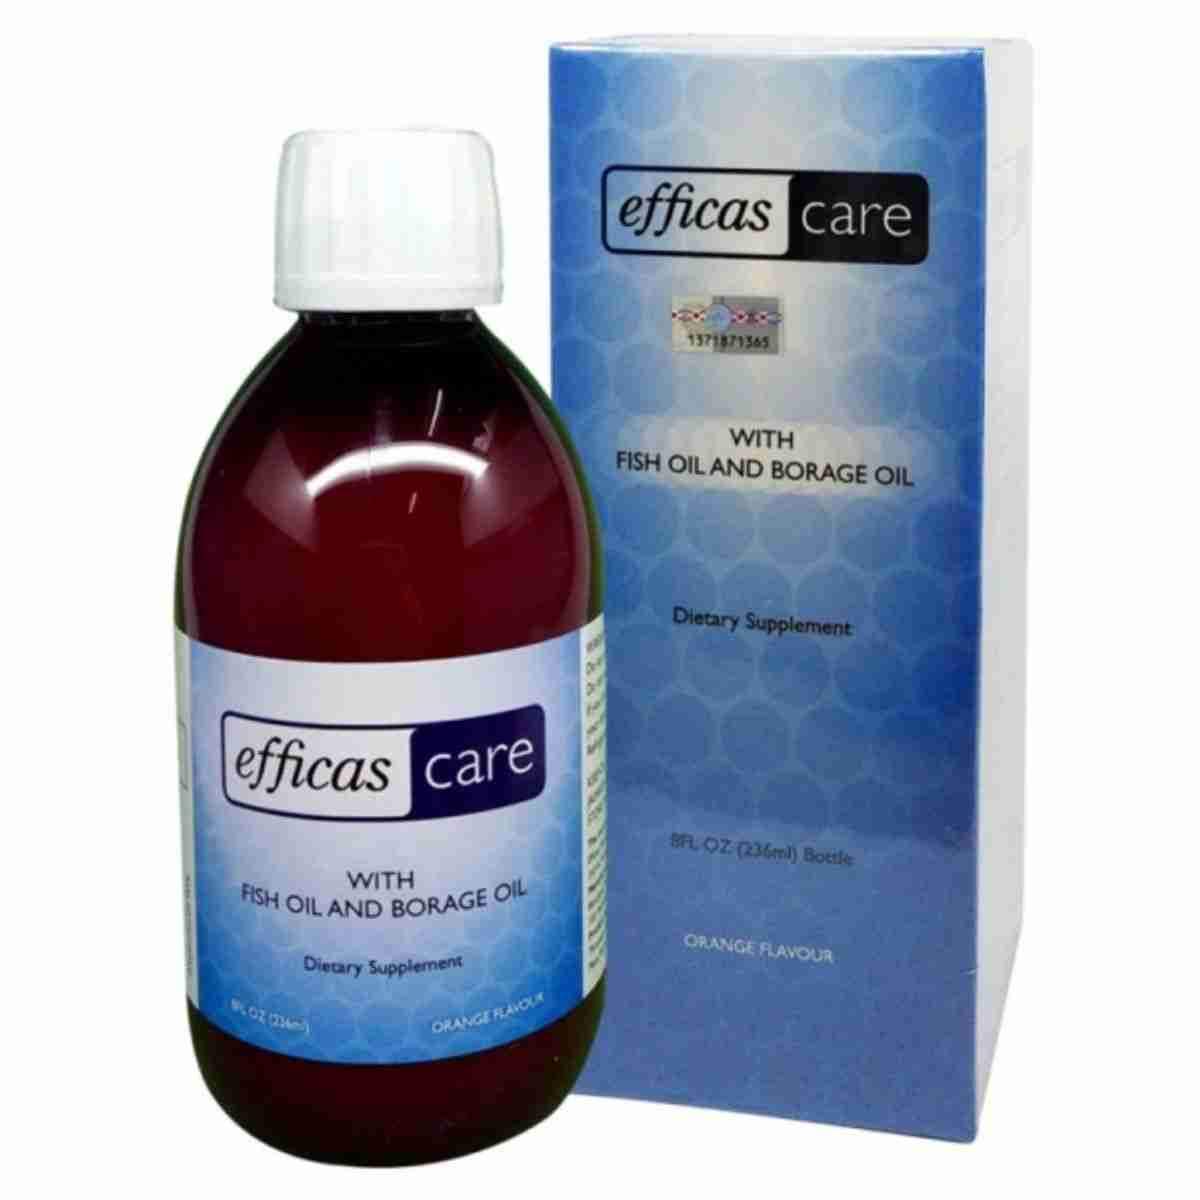 Efficas Care with Fish Oil and Borage Oil (Orange) 236ml - DoctorOnCall Online Pharmacy